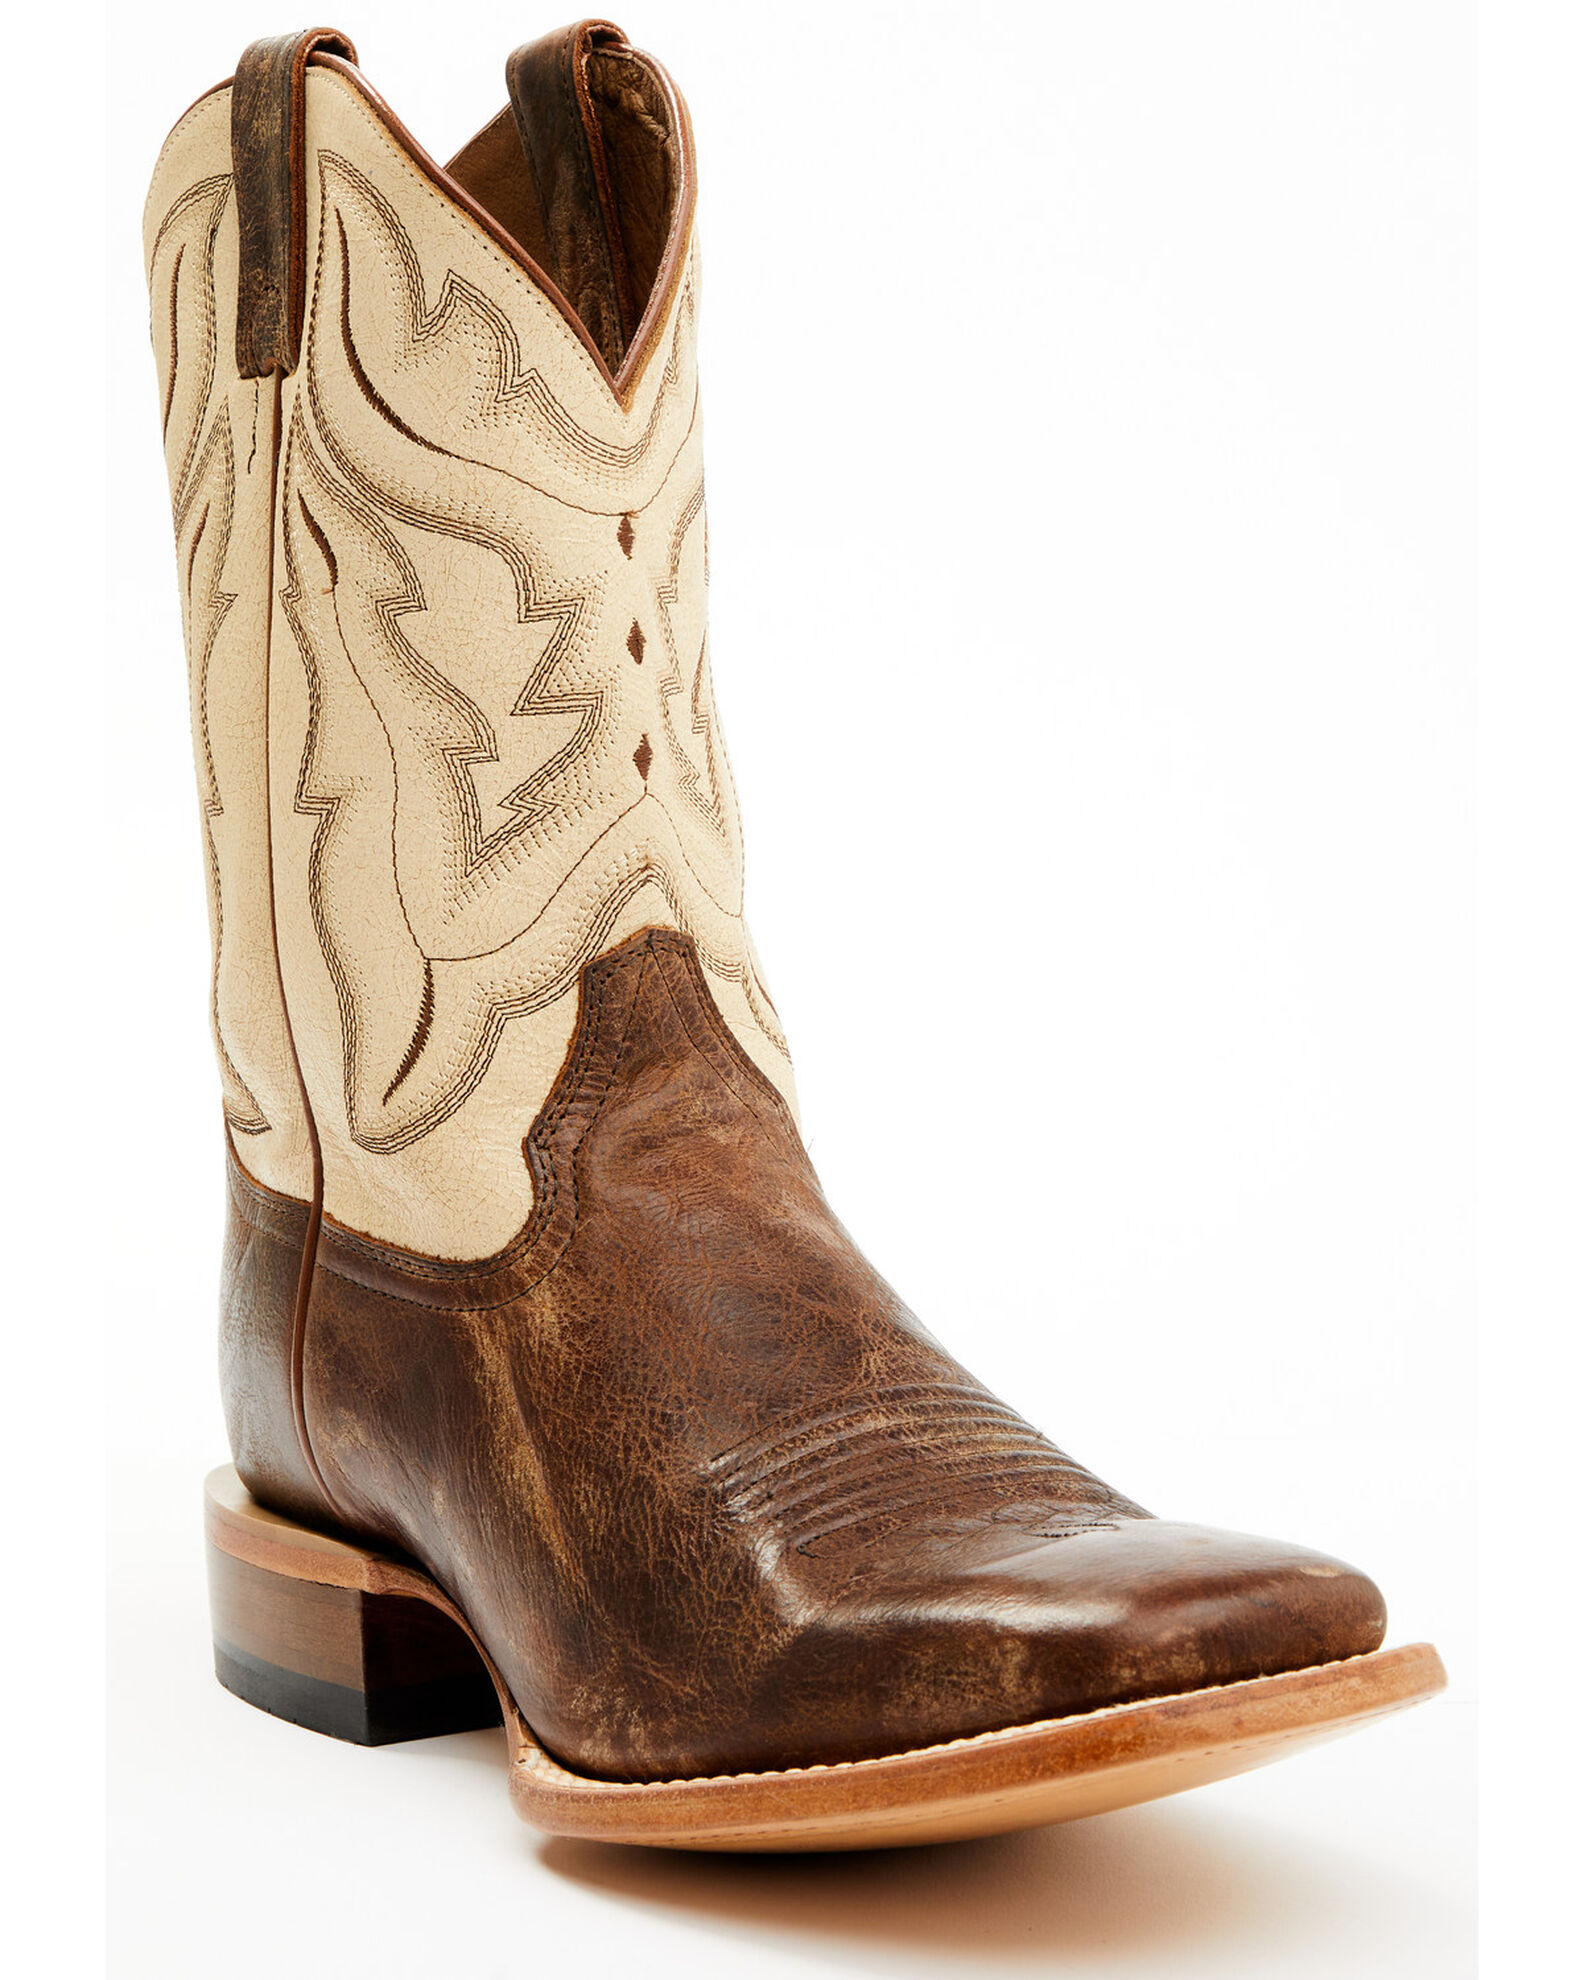 Men's Cody James Exotic Python Western Boots - Broad Square Toe